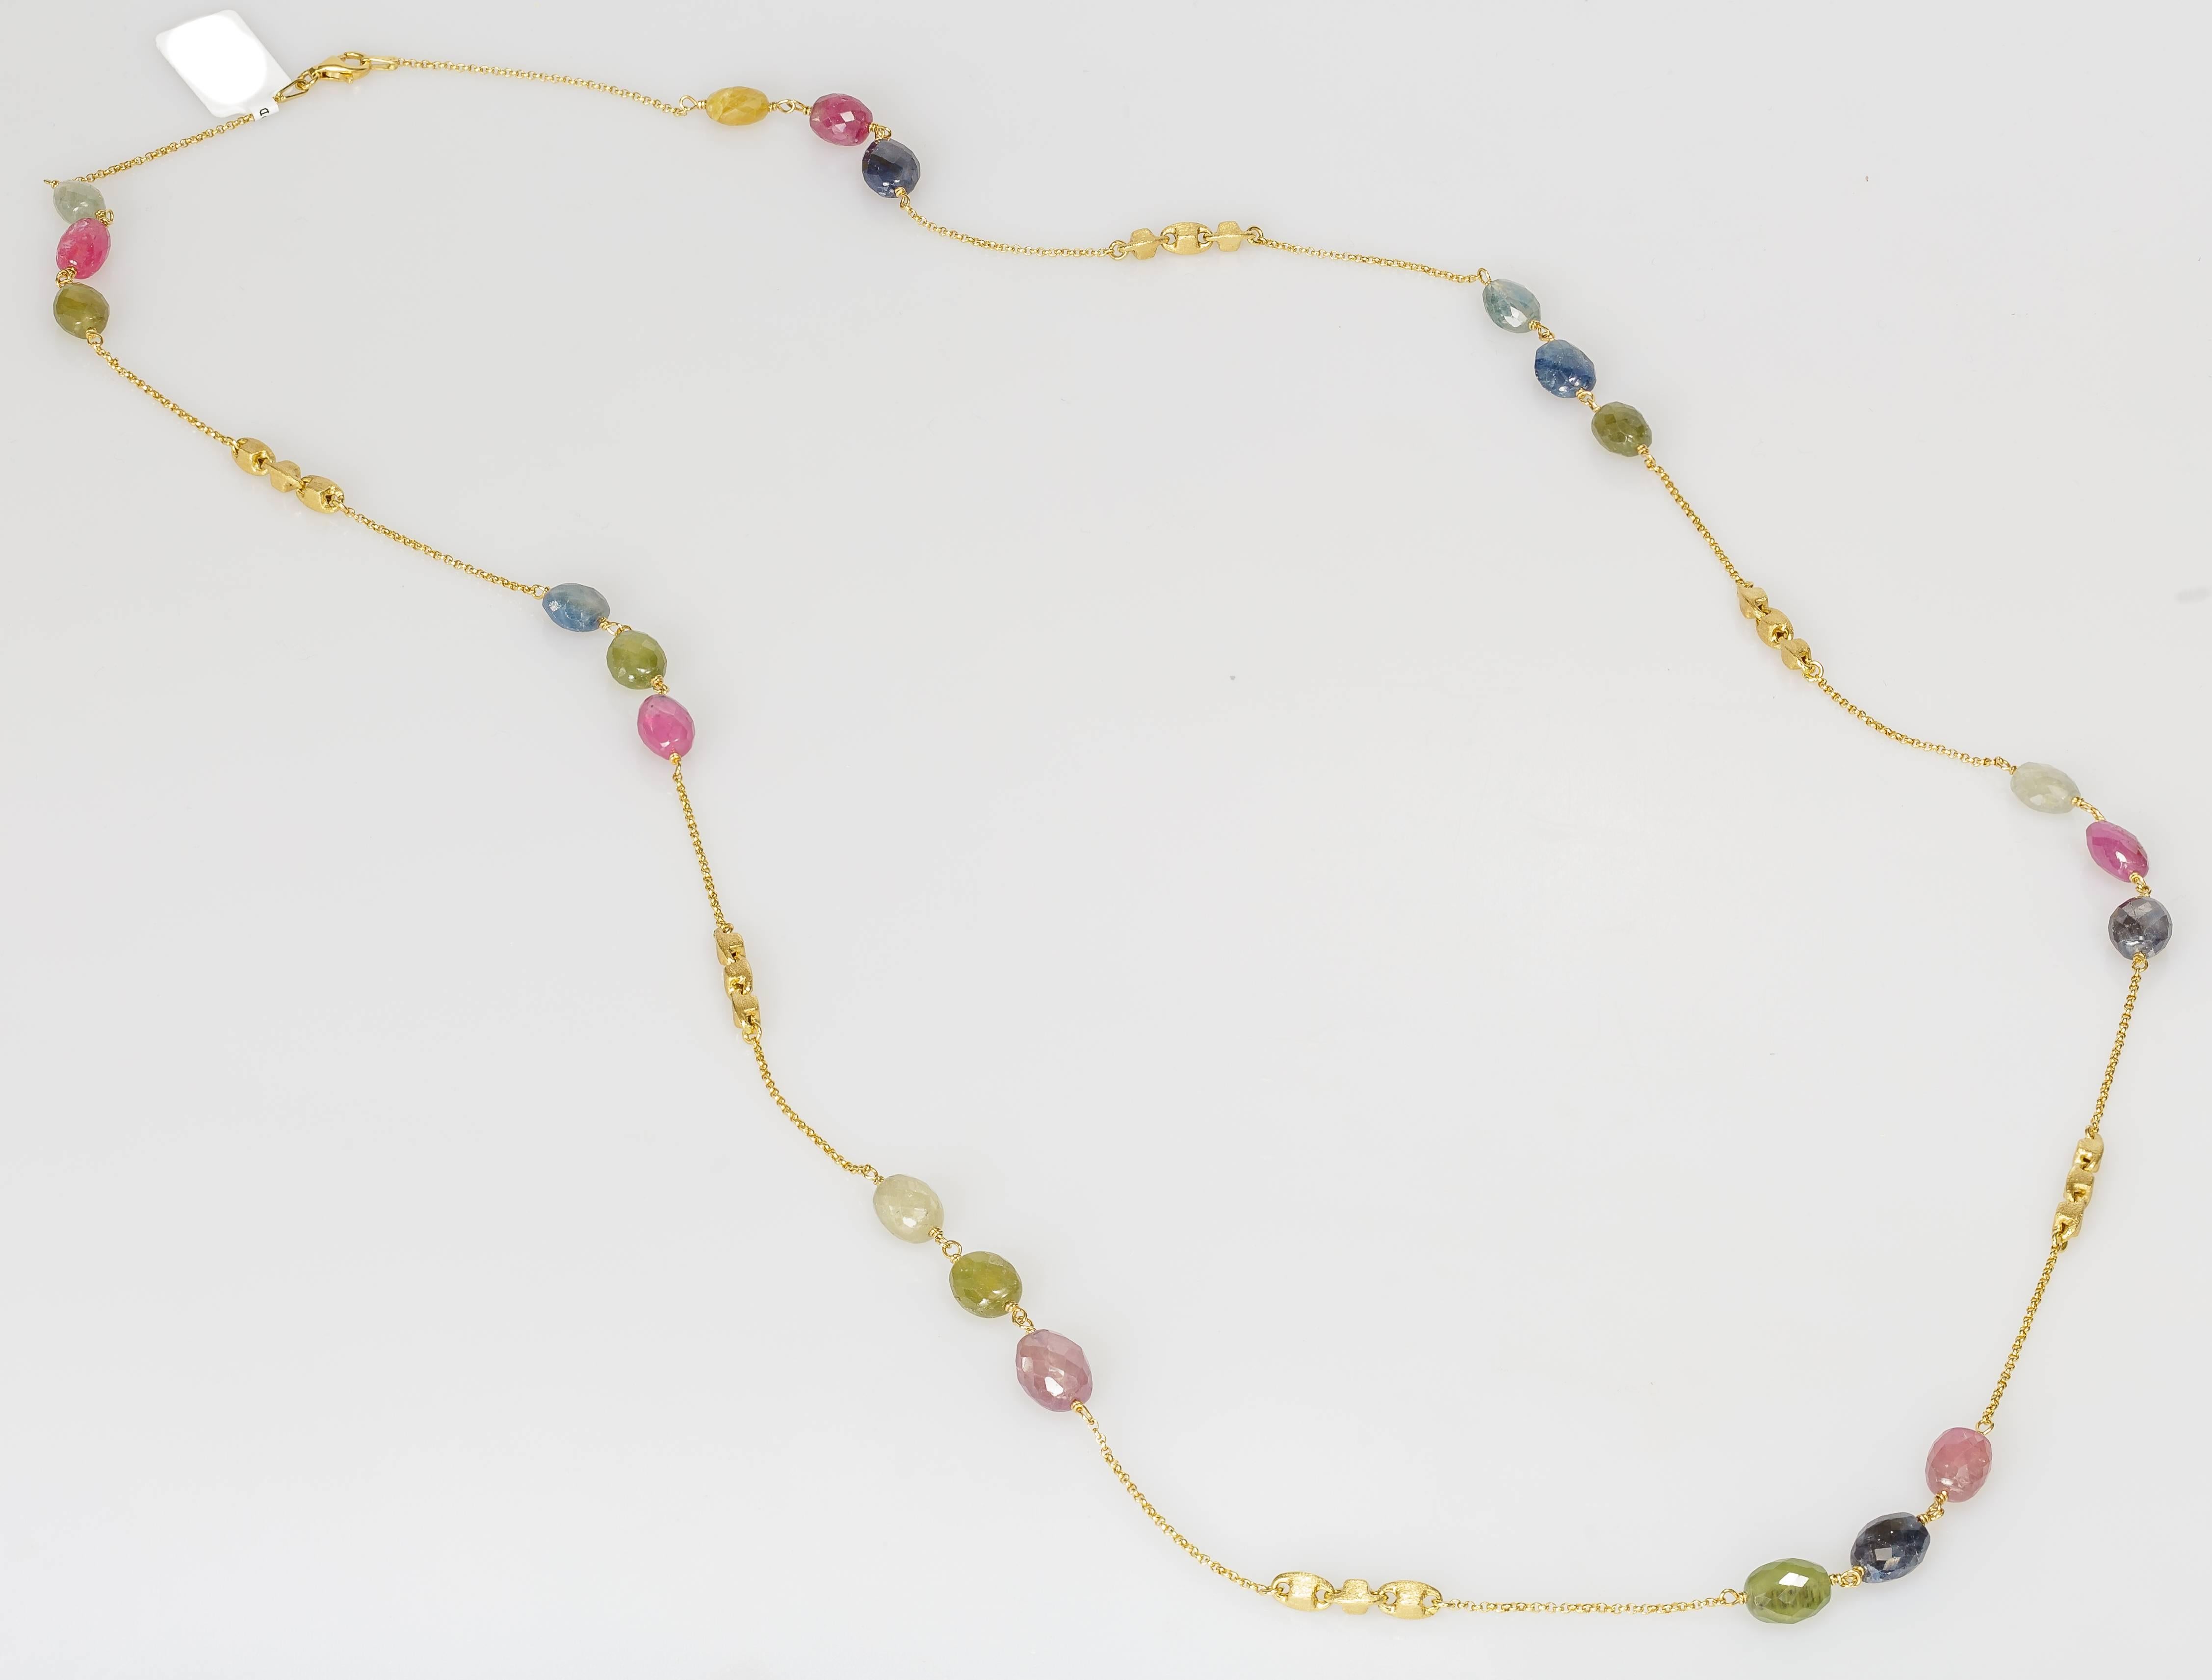 This Yvel beaded chain necklace features natural fancy colored sapphire rose cut beads linked by a 36 inch long 18k yellow gold chain. This necklace can be worn long or doubled for a shorter length. 